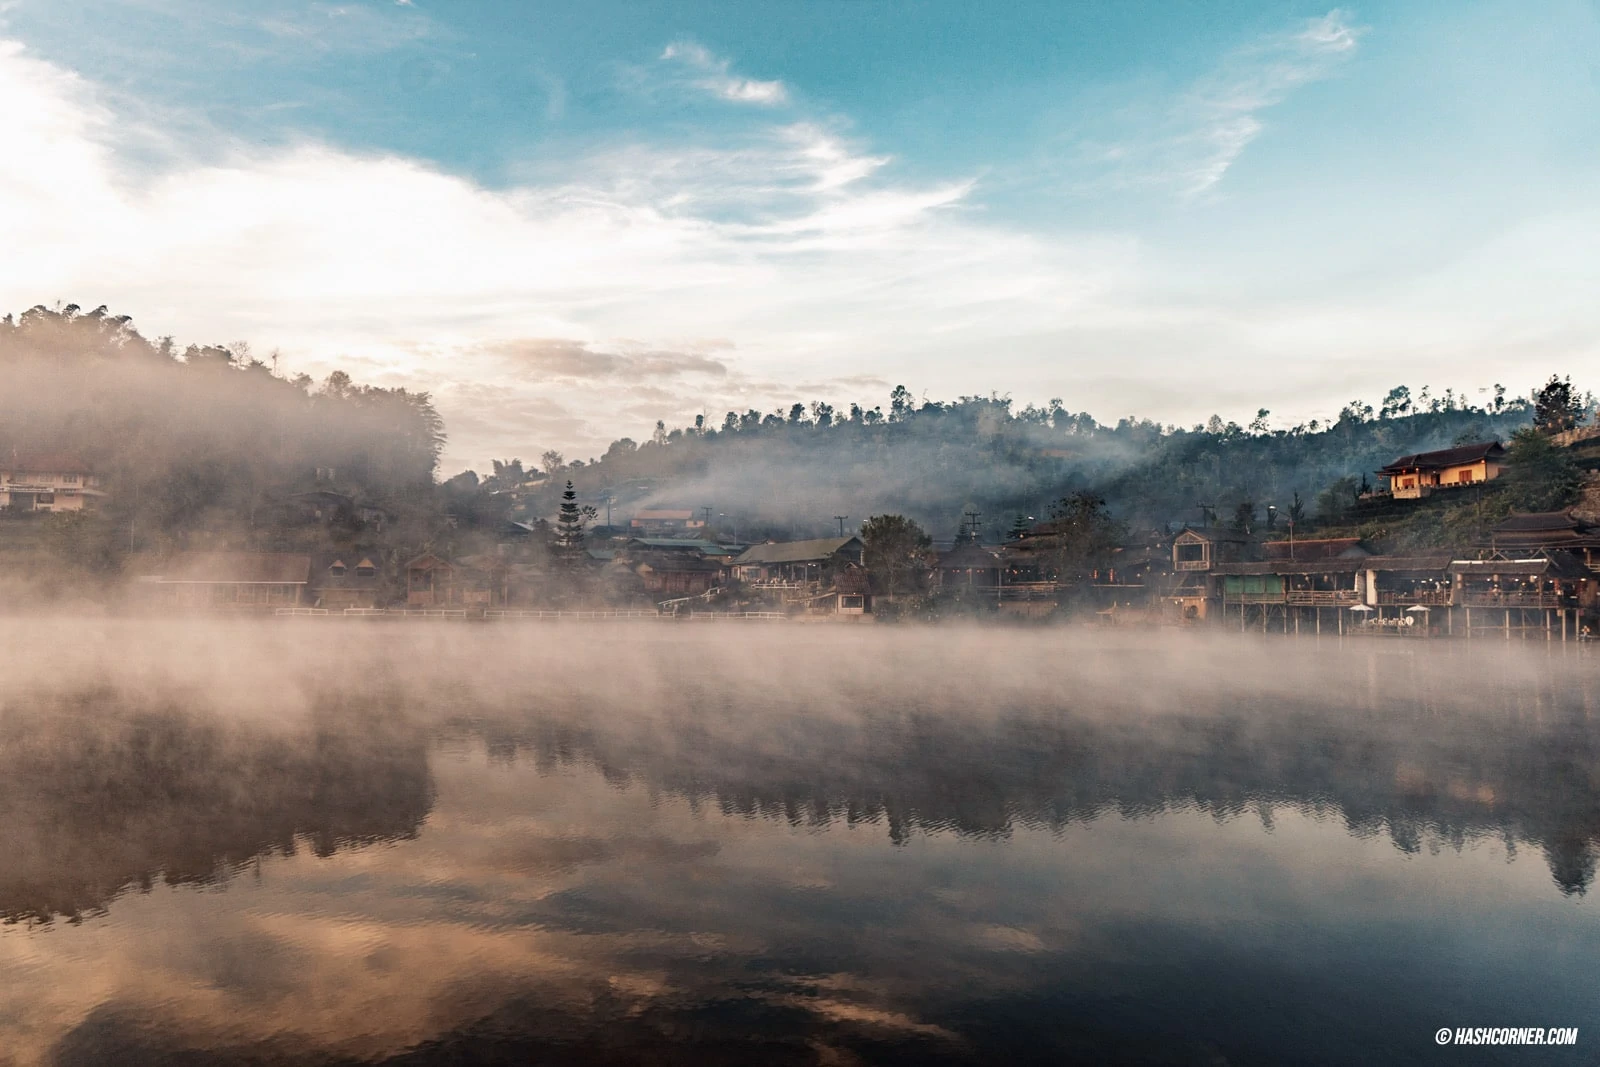 Mae Hong Son: 16 Unmissable Places &#038; Things To Do